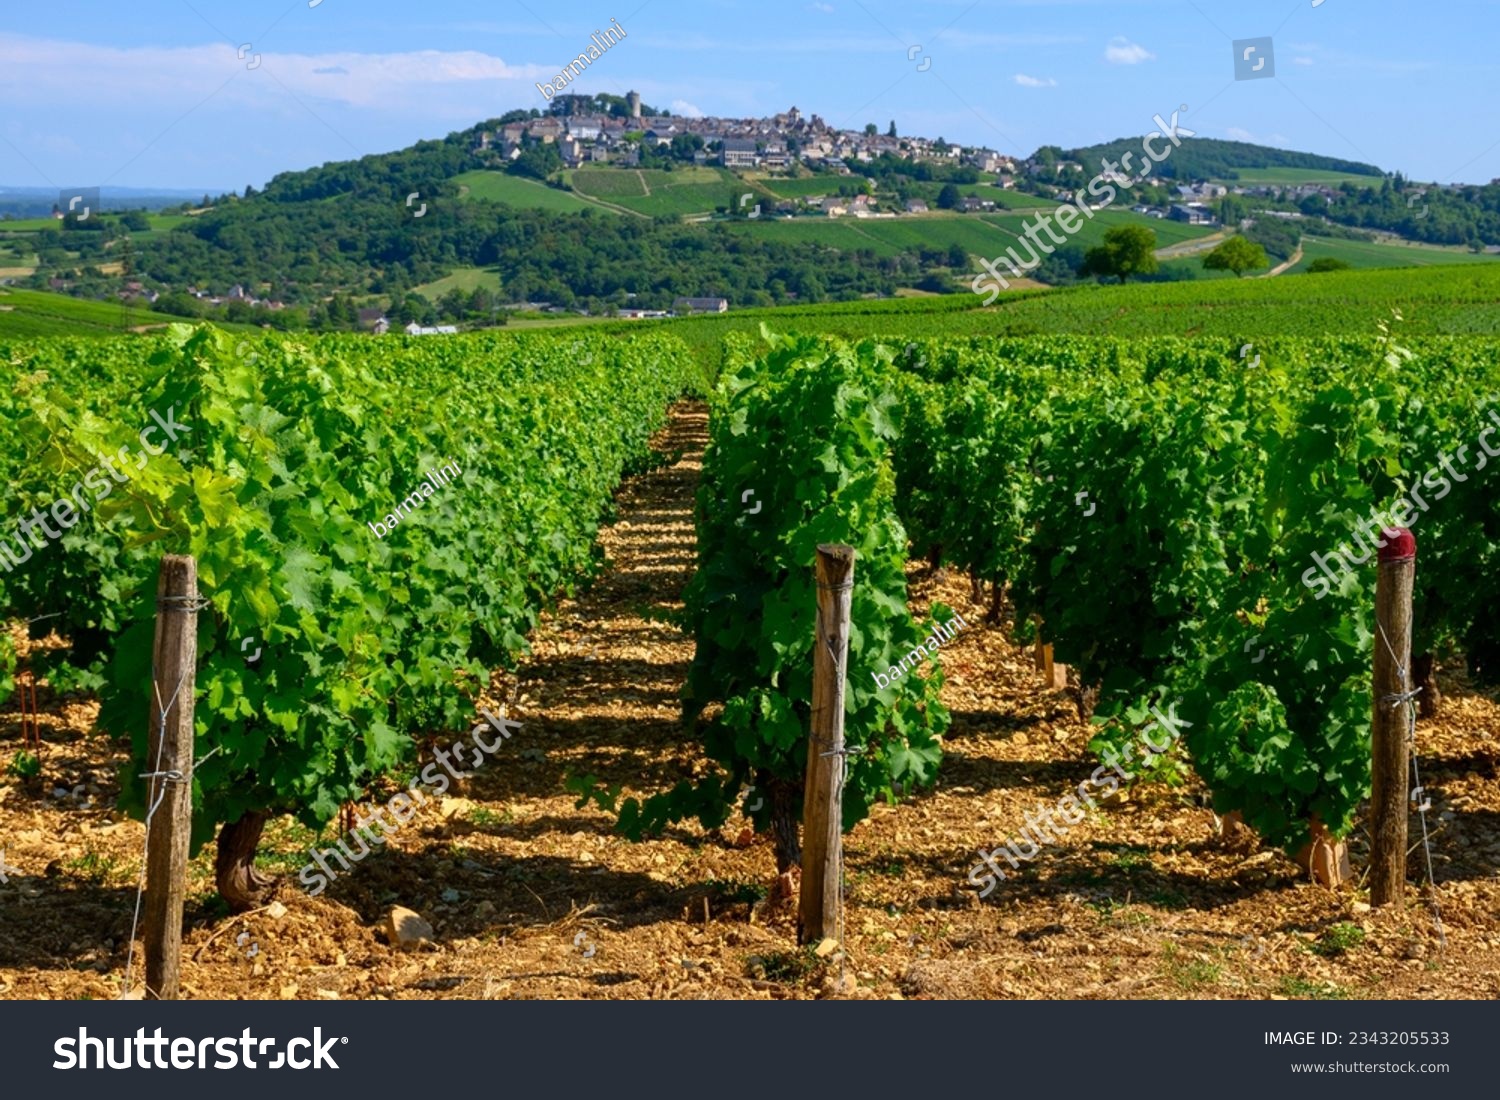 View on green vineyards around Sancerre wine making village, rows of sauvignon blanc grapes on hills with different soils, Cher, Loire valley, France #2343205533